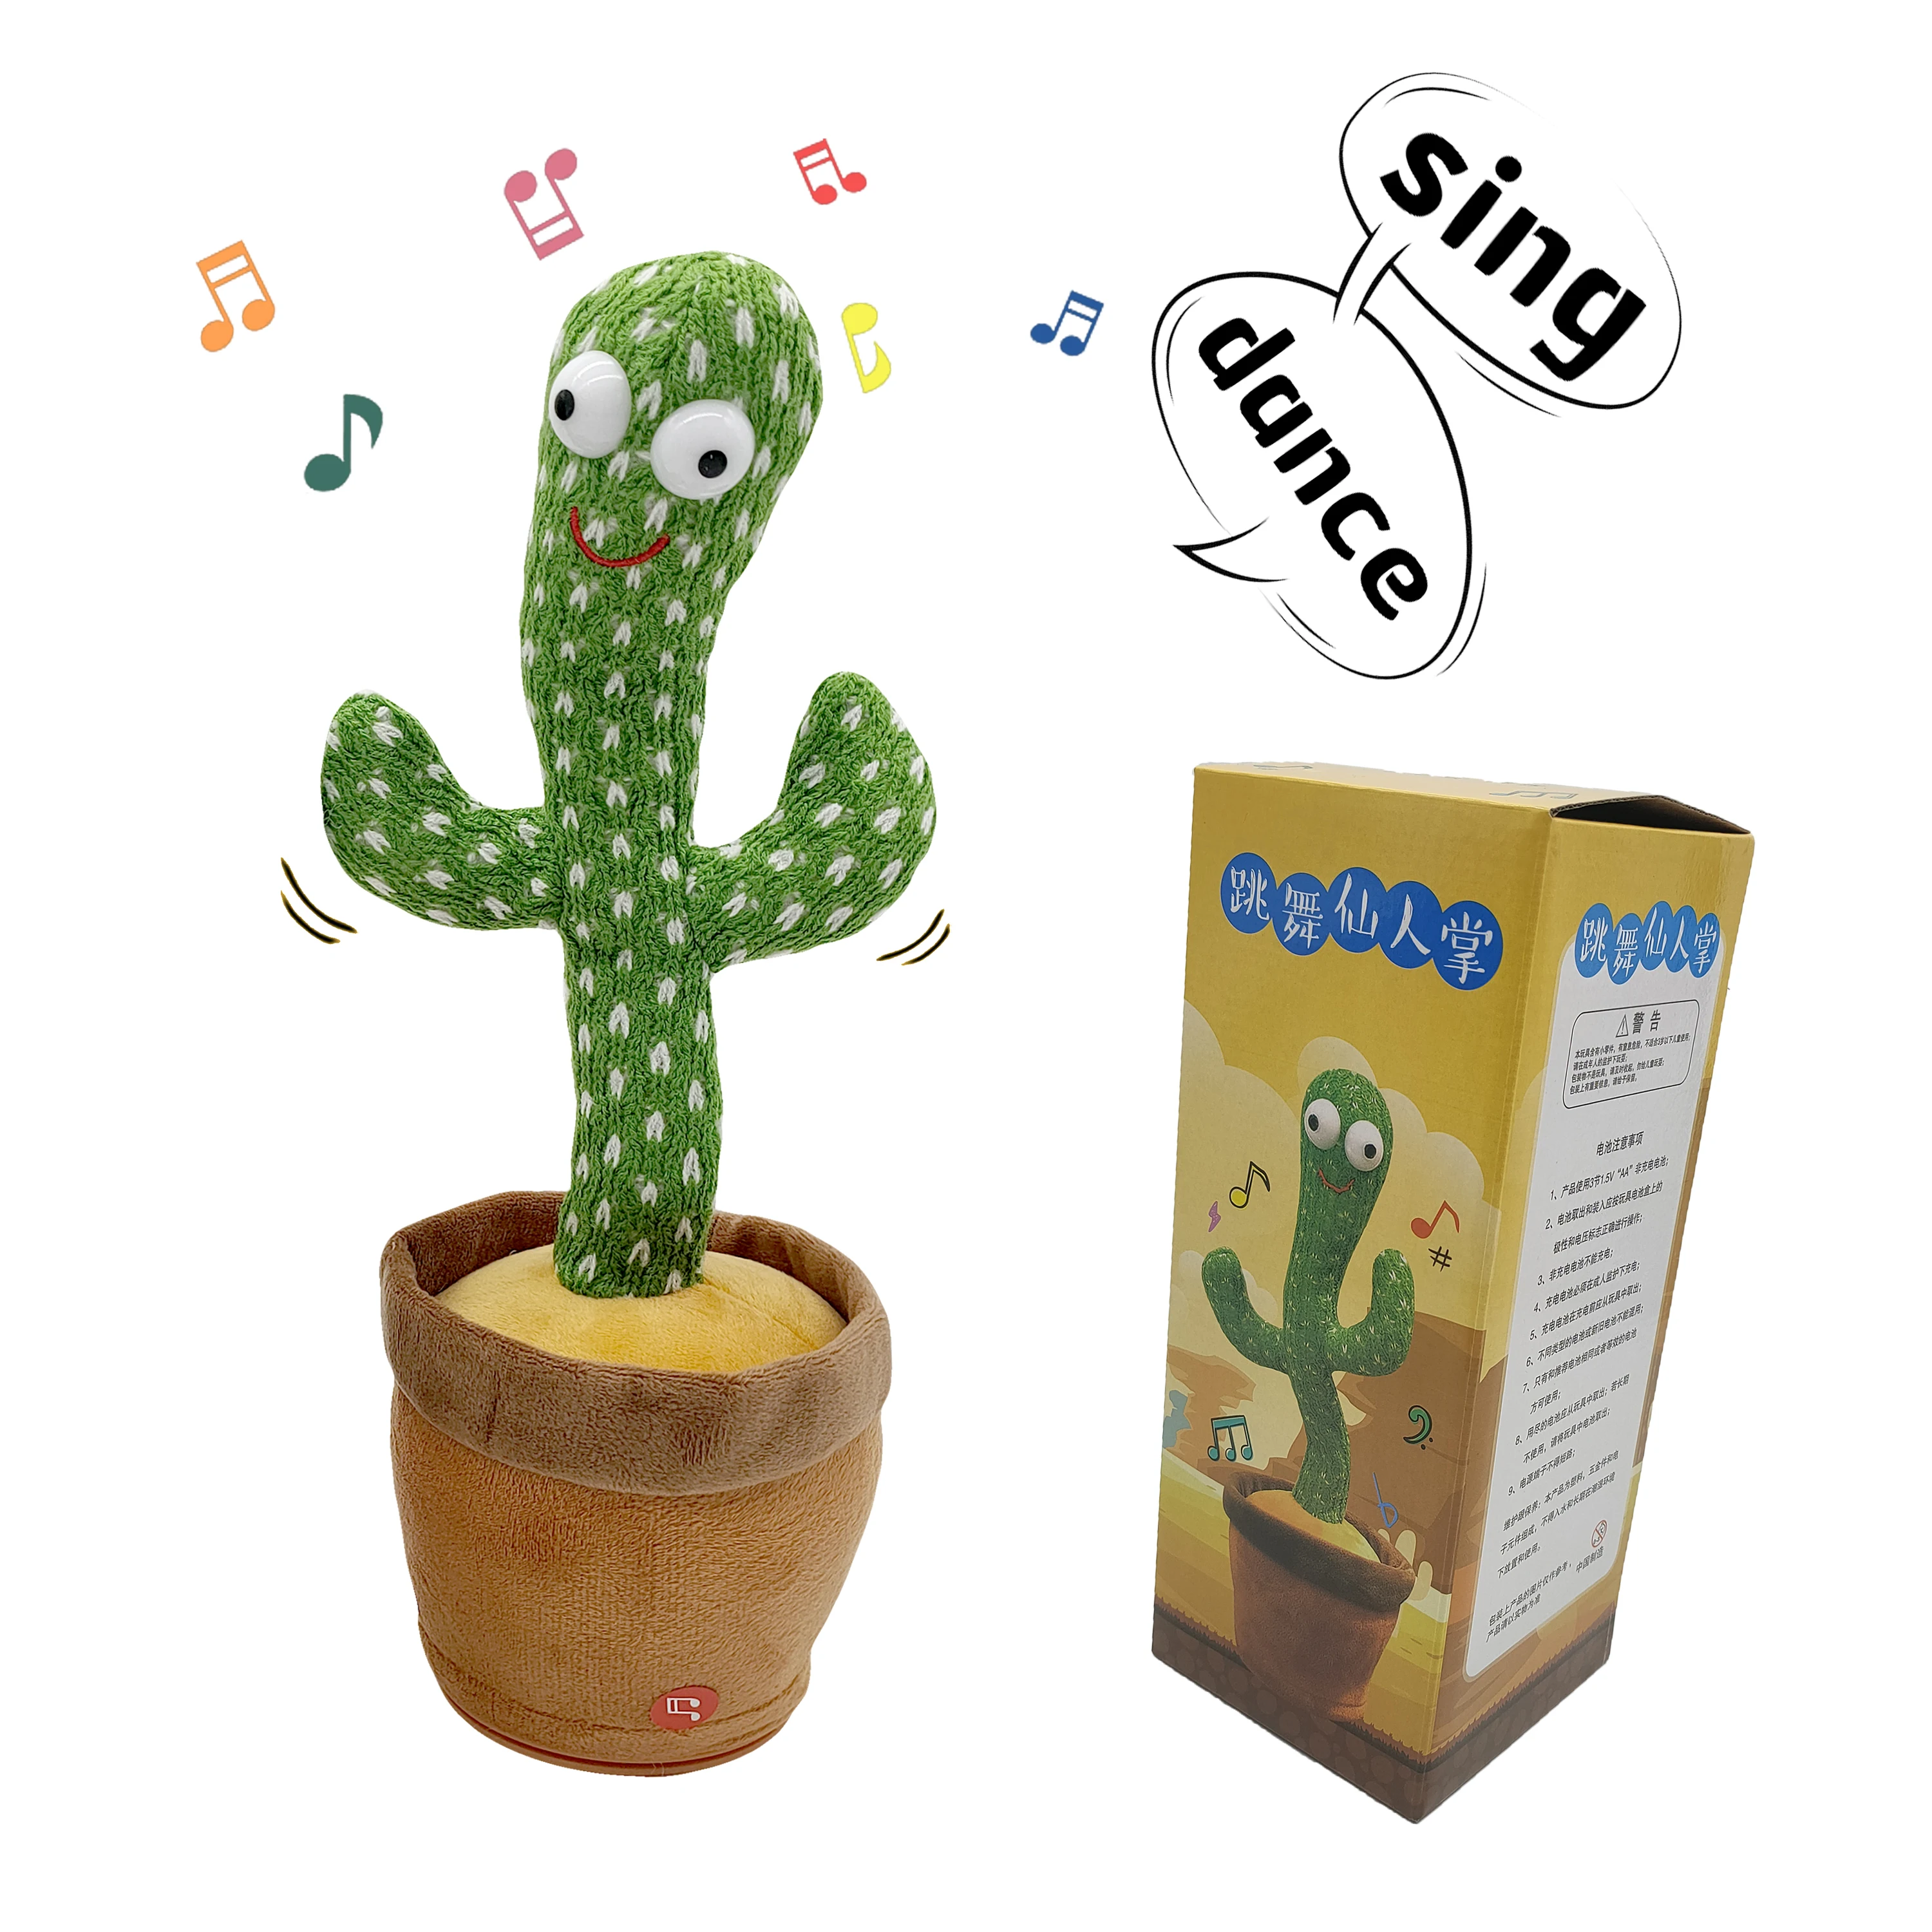 Benolls Dancing Cactus Toy,Talking Repeat Singing Sunny Cactus Toy 120 Pcs Songs for Baby 15S Record Your Sound Sing+Repeat+Dancing+Recording+LED 